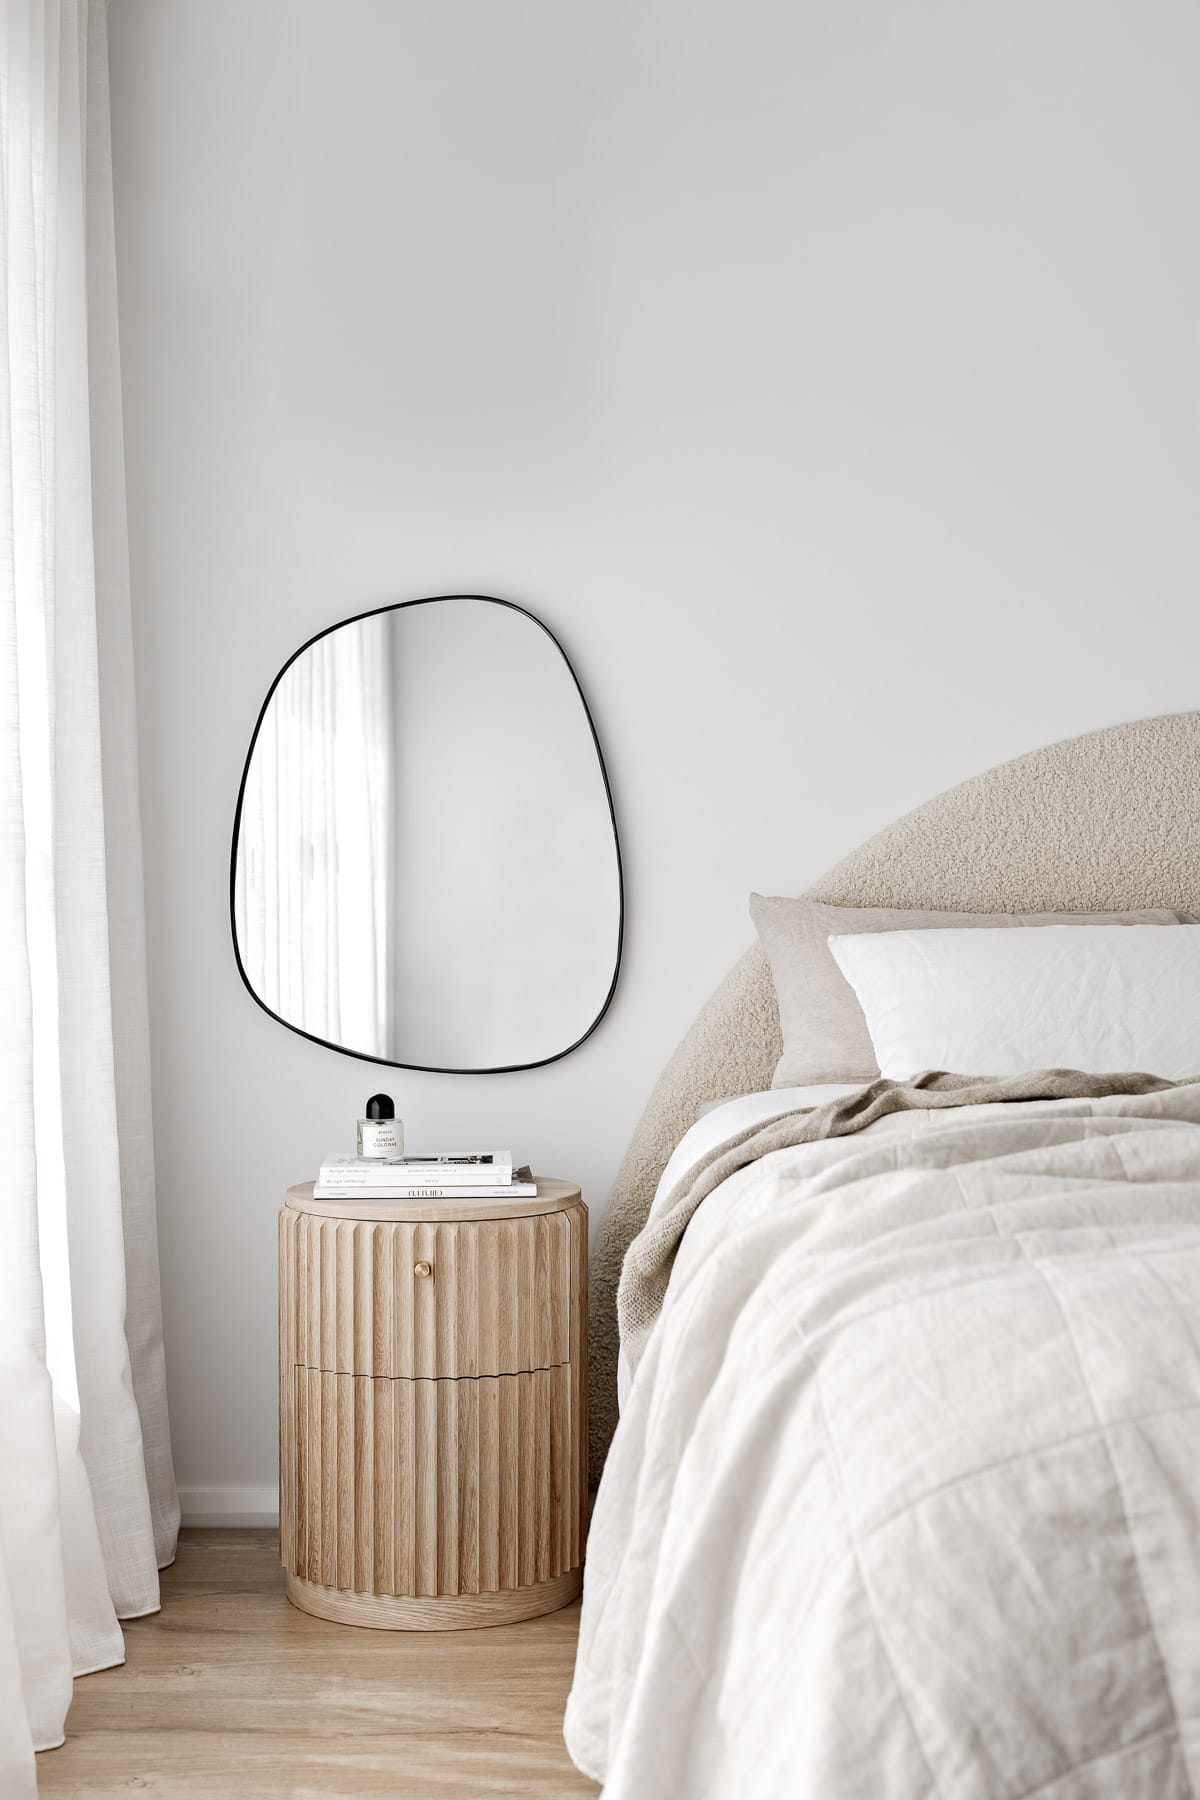 Showing the Underline Bedside Table by Hegi Design House styled in a bedroom